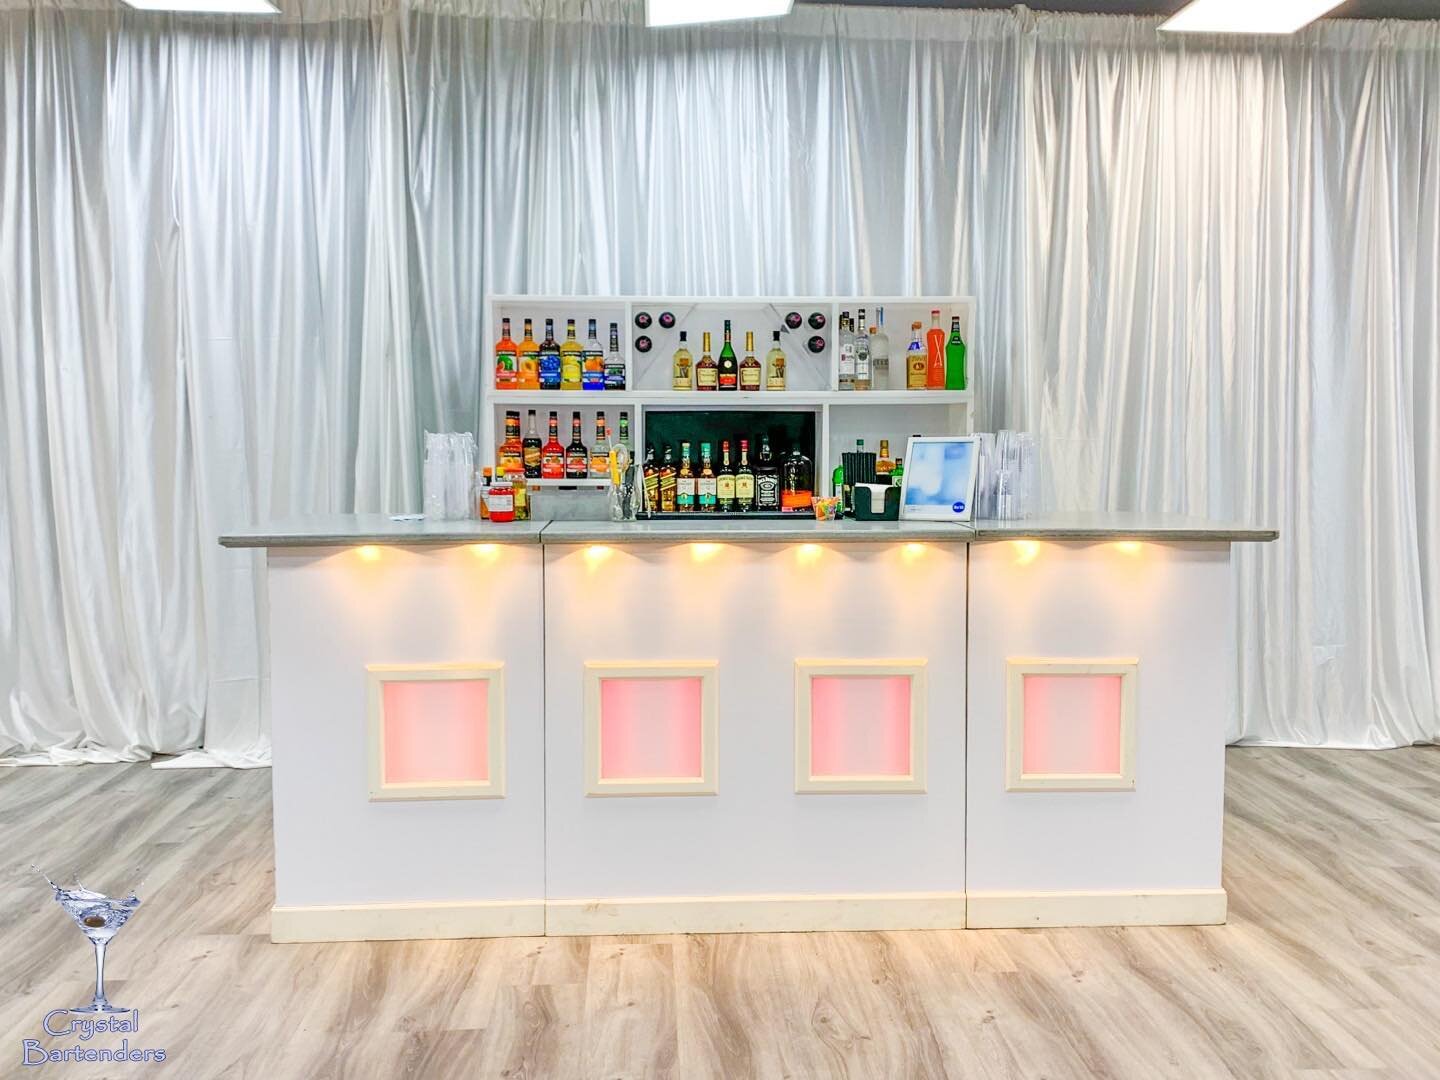 A bar that doesn&rsquo;t disappoint! 
Bring all the style to your event with our variety of bar service packages. 
We know you&rsquo;ve been dreaming of an elegant bar area. 😍
Drop a &ldquo; &rdquo; if you are loving this setup! ❤️
.
.
.
.
.
.
.
.
#